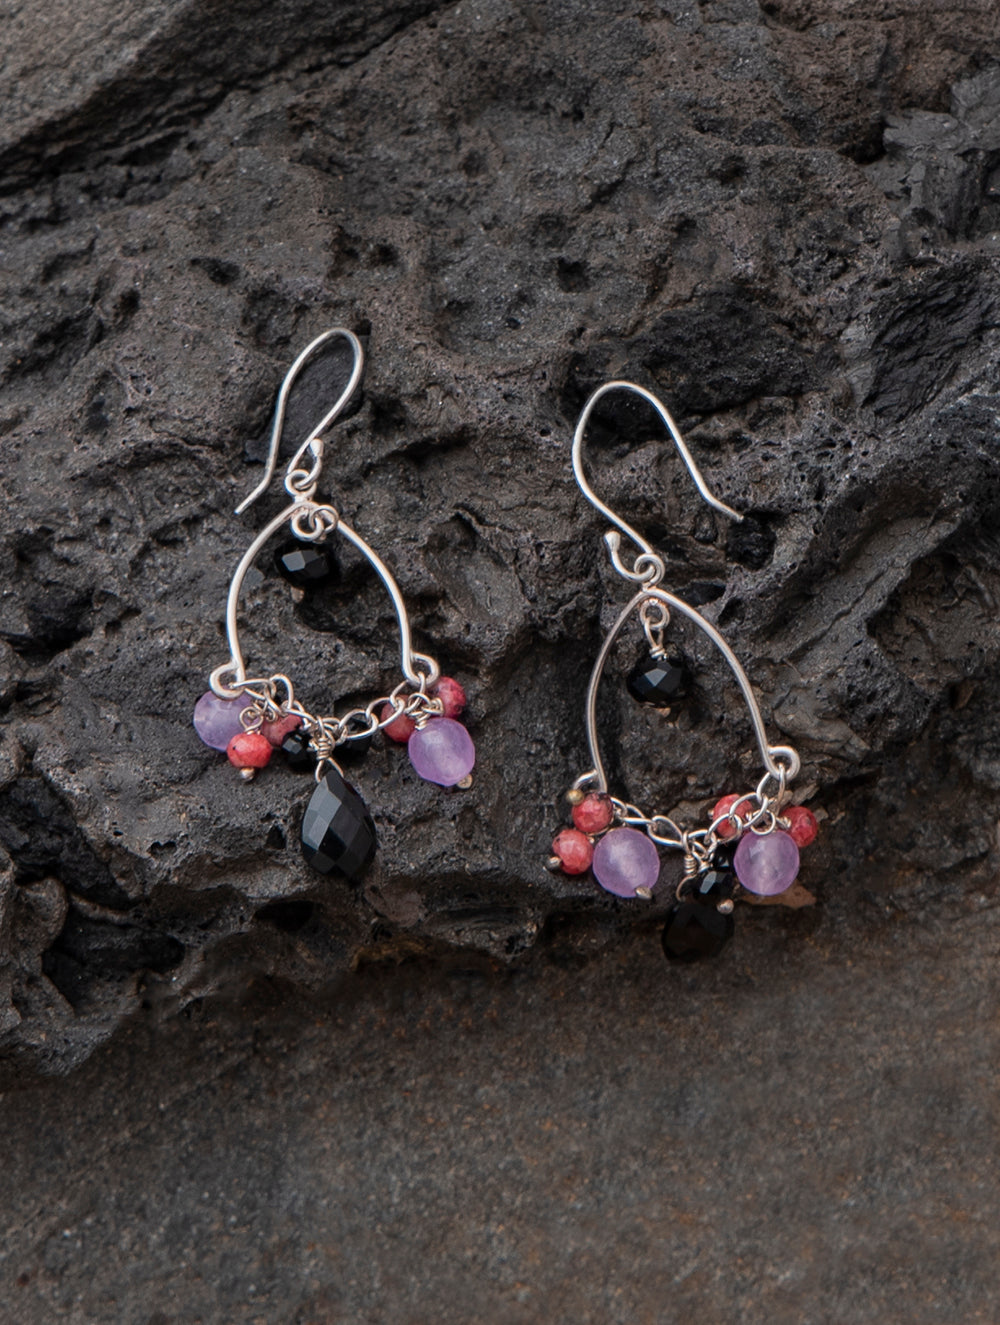 Load image into Gallery viewer, Pure Silver Earrings With Semi Precious Stones - Lavender Dainty Earrings